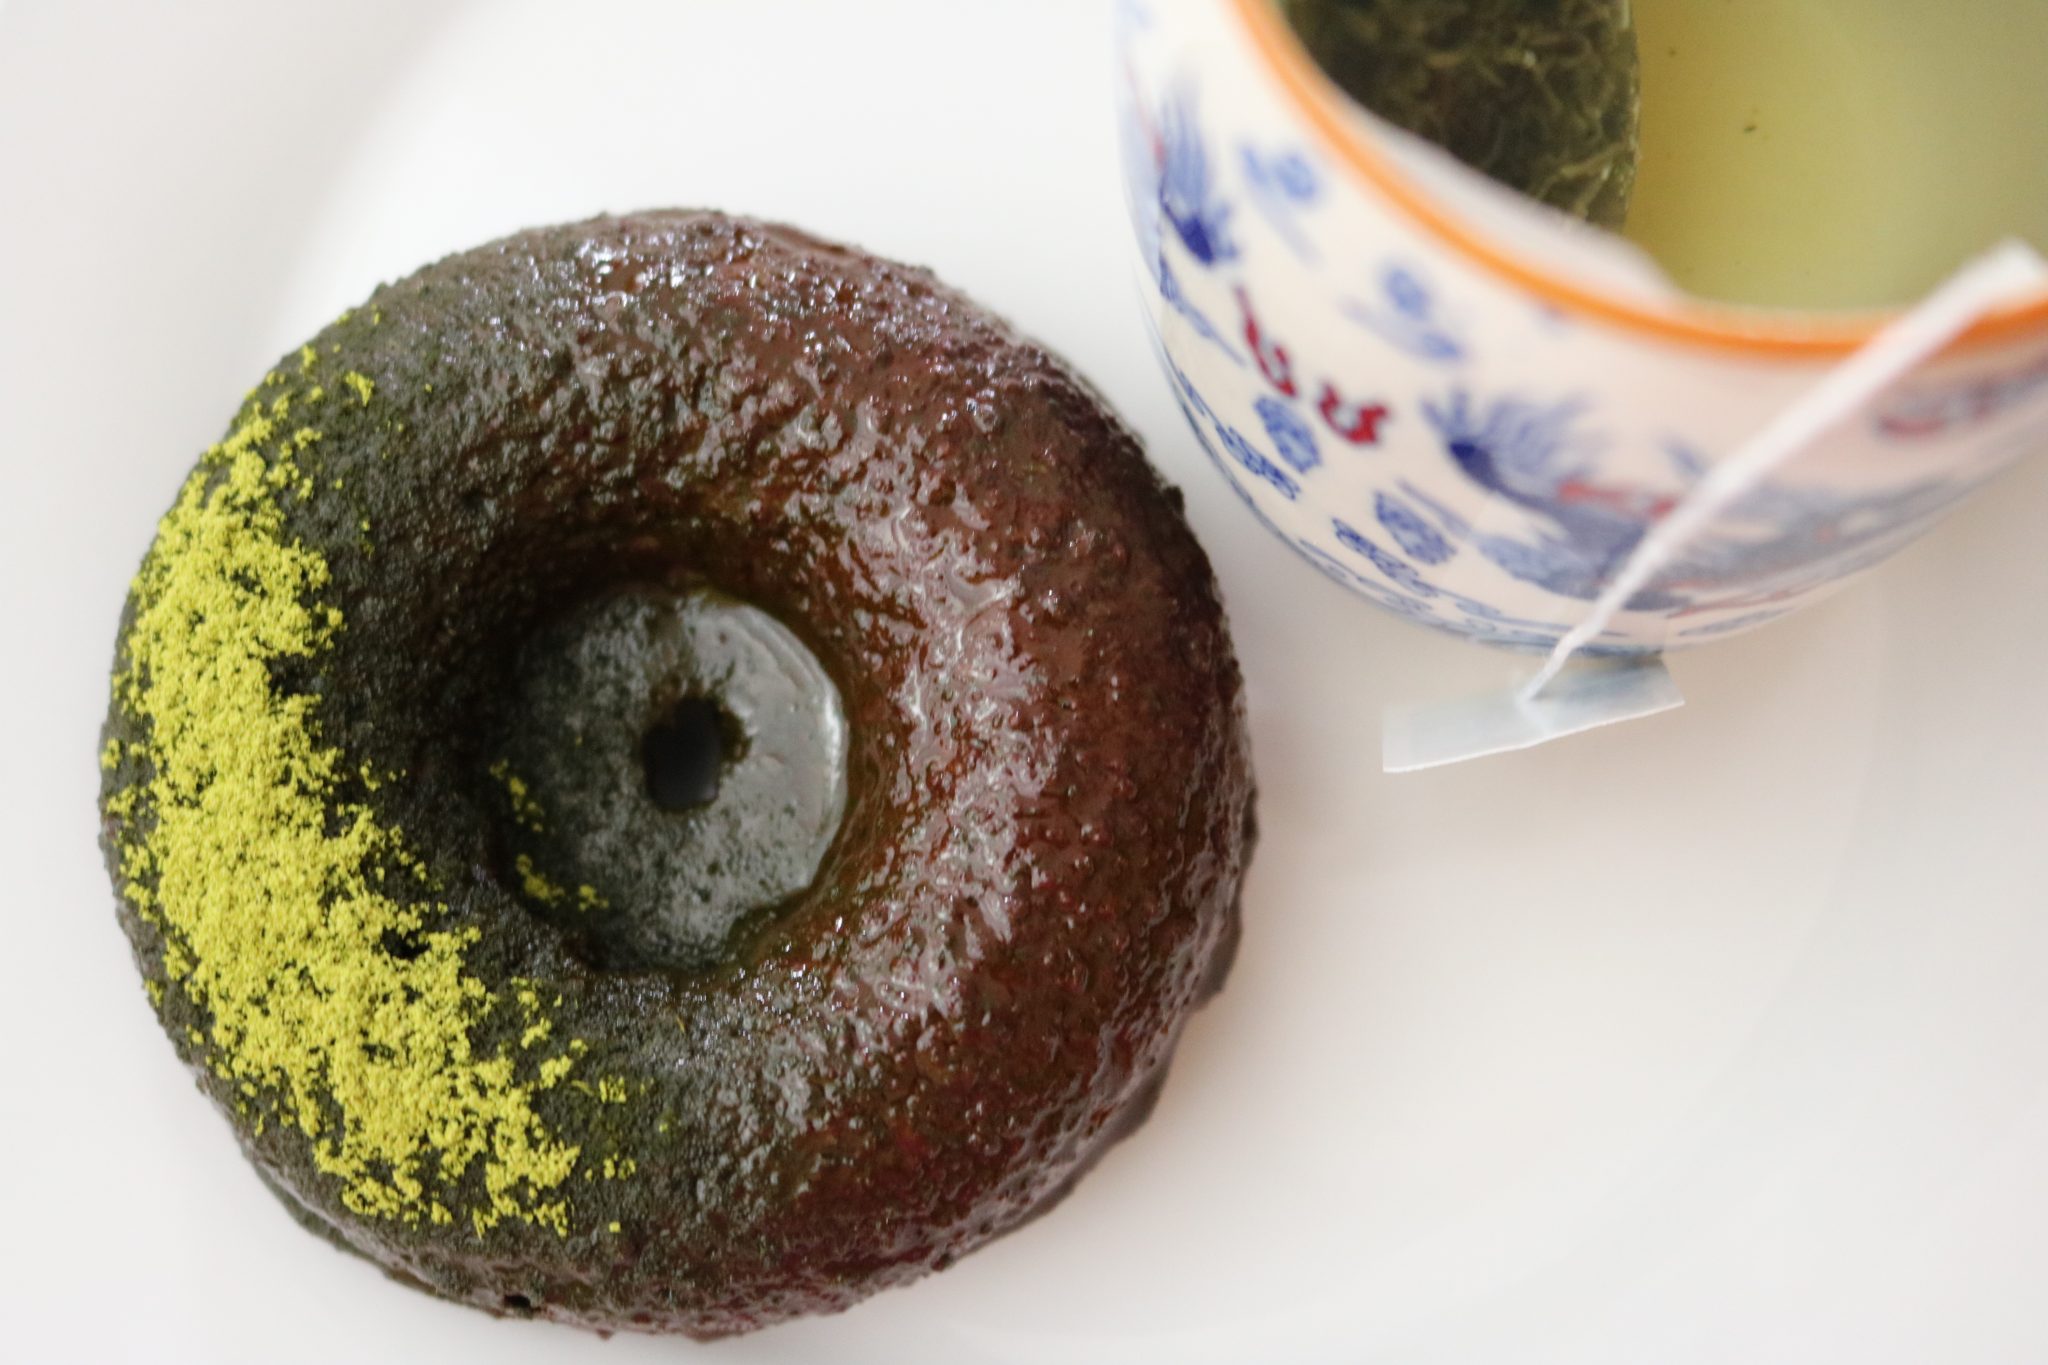 Matcha Donuts Recipe - delicious and healthy!